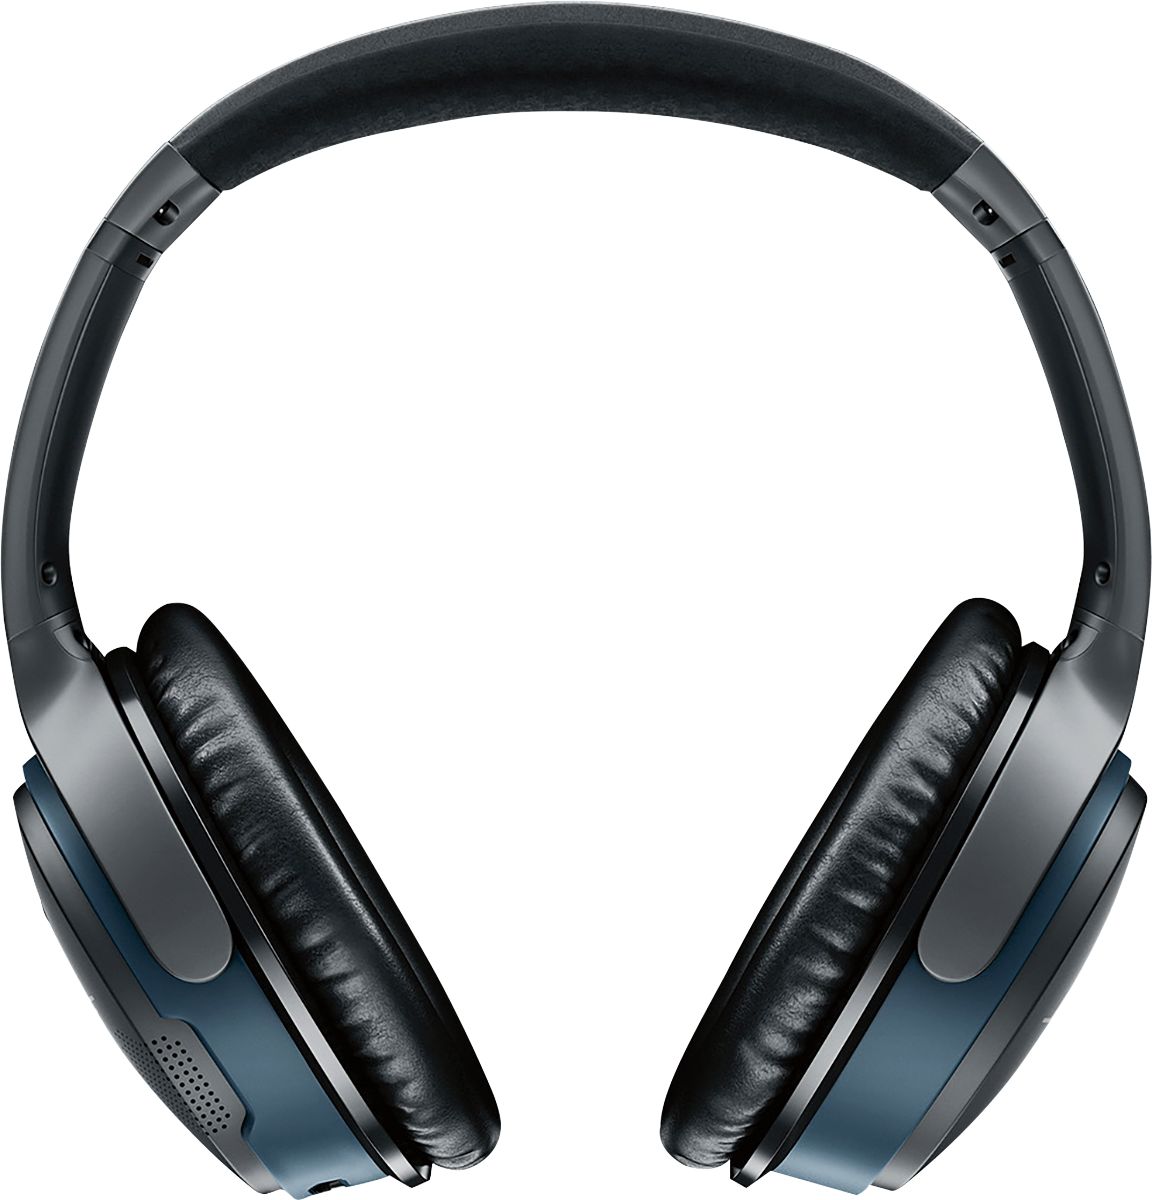 Angle View: Bose - SoundLink II Wireless Over-the-Ear Headphones - Black